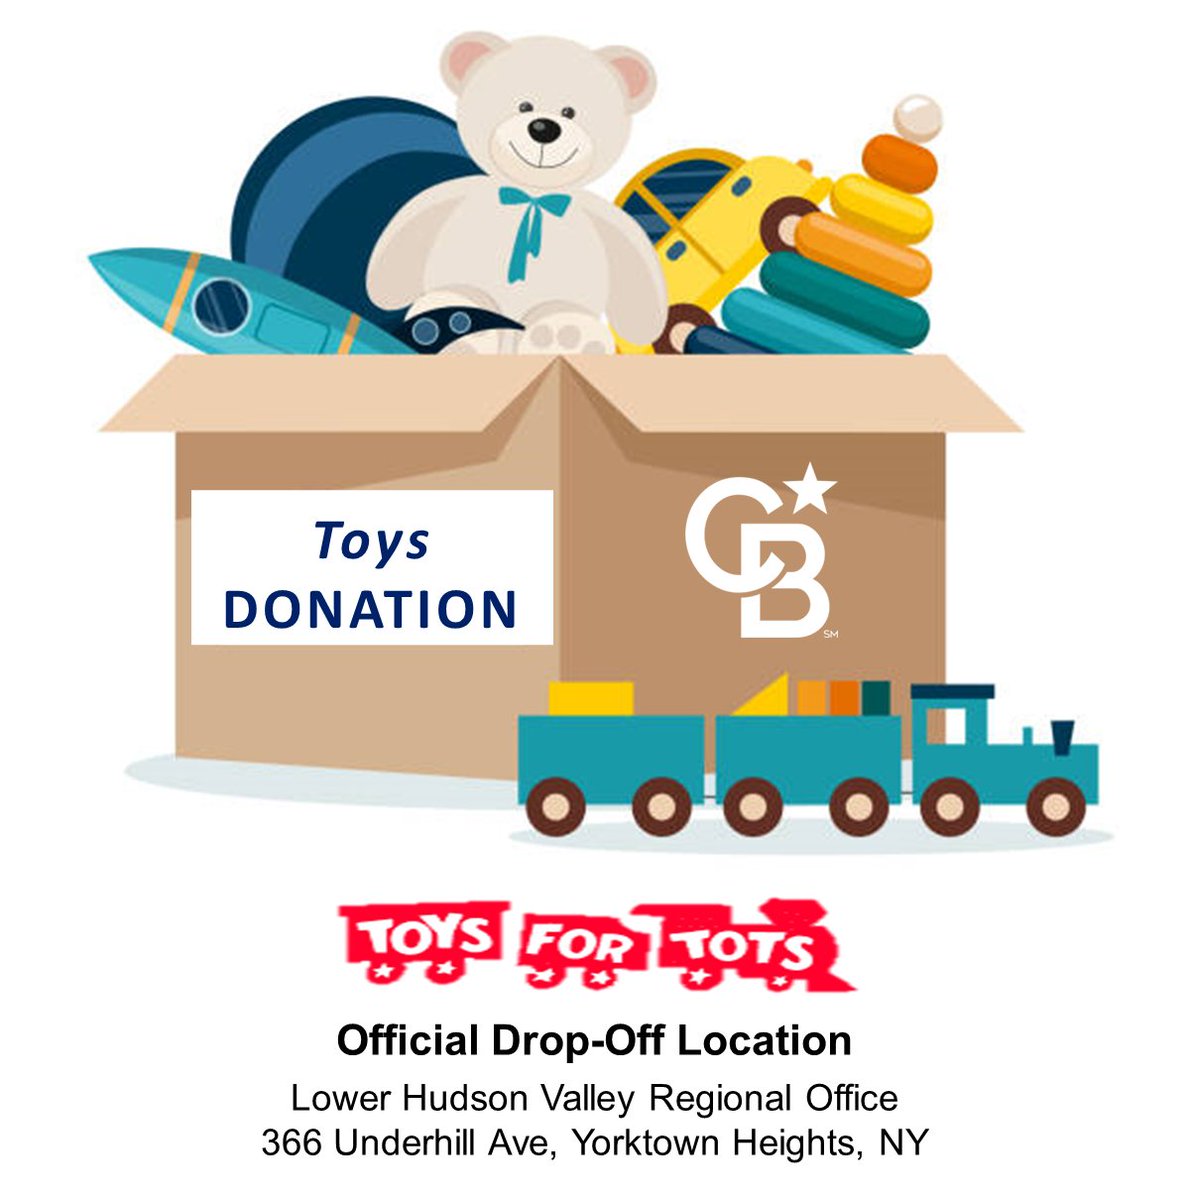 Would you like to help make someone's Christmas merry? We are again collecting ‘Toys for Tots’. Please stop by our office to drop off an unwrapped new toy!
#ctwc #cbr #coldwellbanker #lhvro #helpsanta #happykidshappylife #christmasiscoming #leaveyourmark #cbtheplacetobe #cbproud